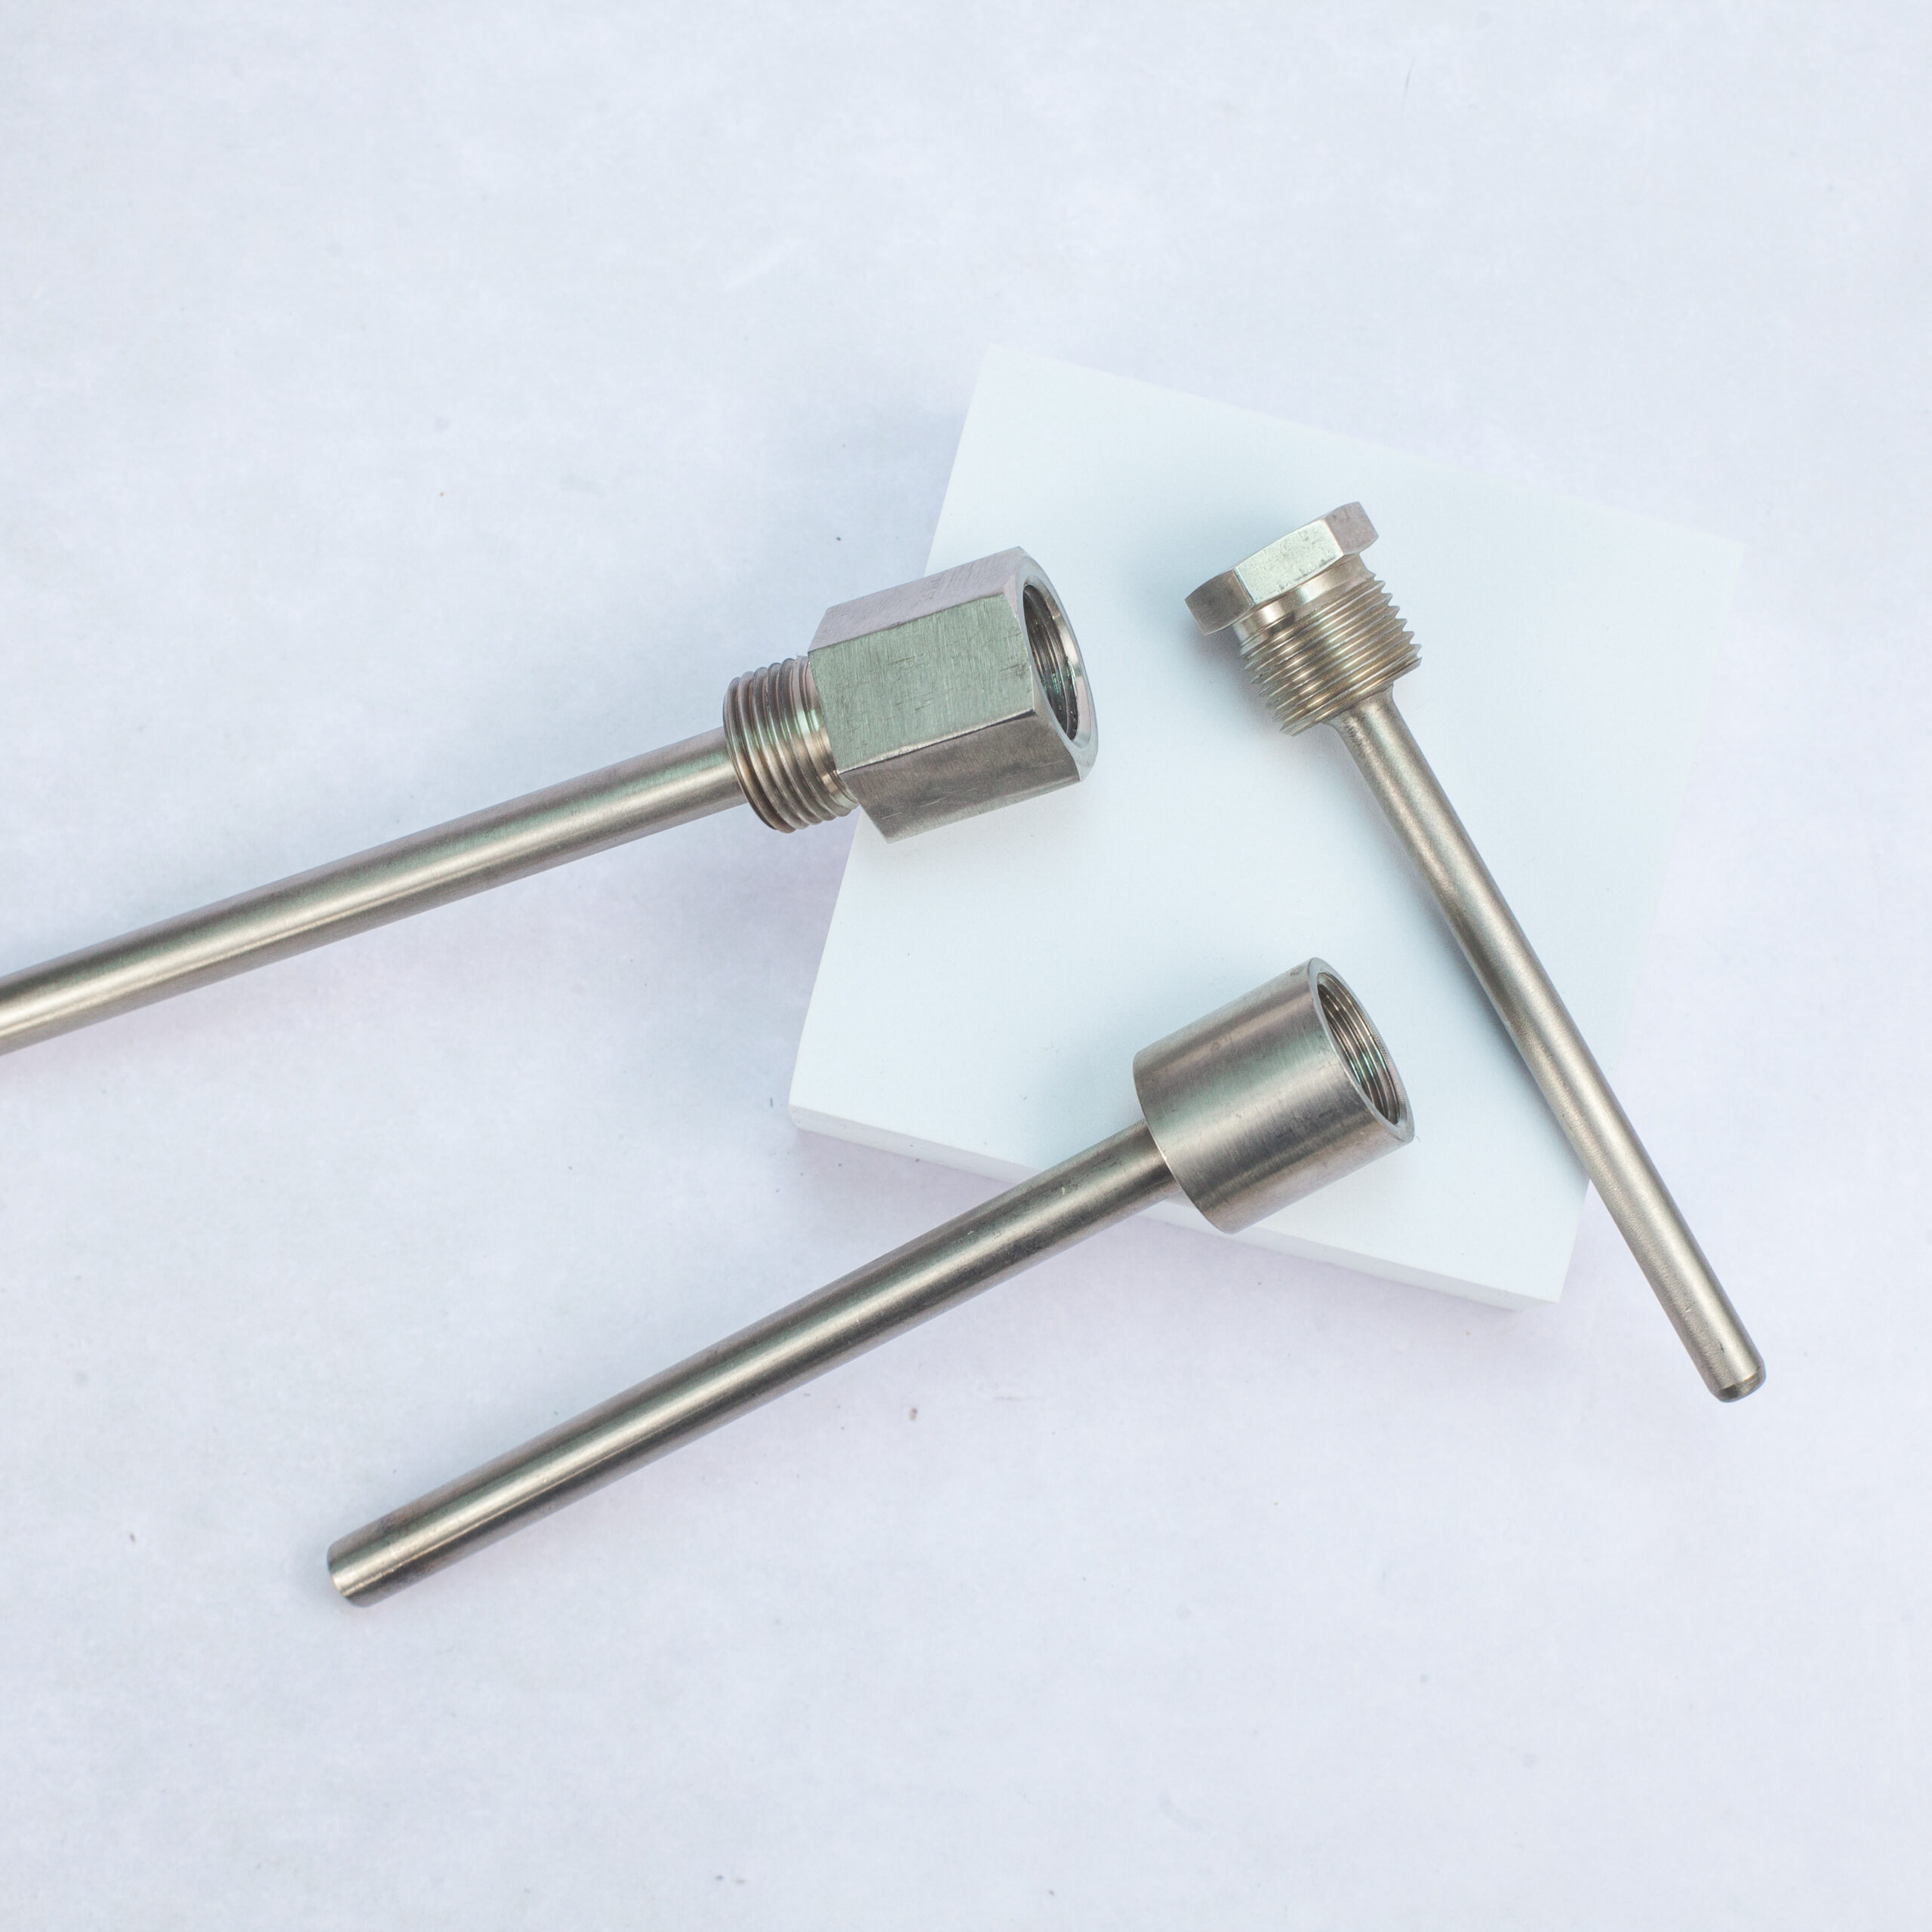 Boiler stack temperature sensor and thermowell, 1k Pt